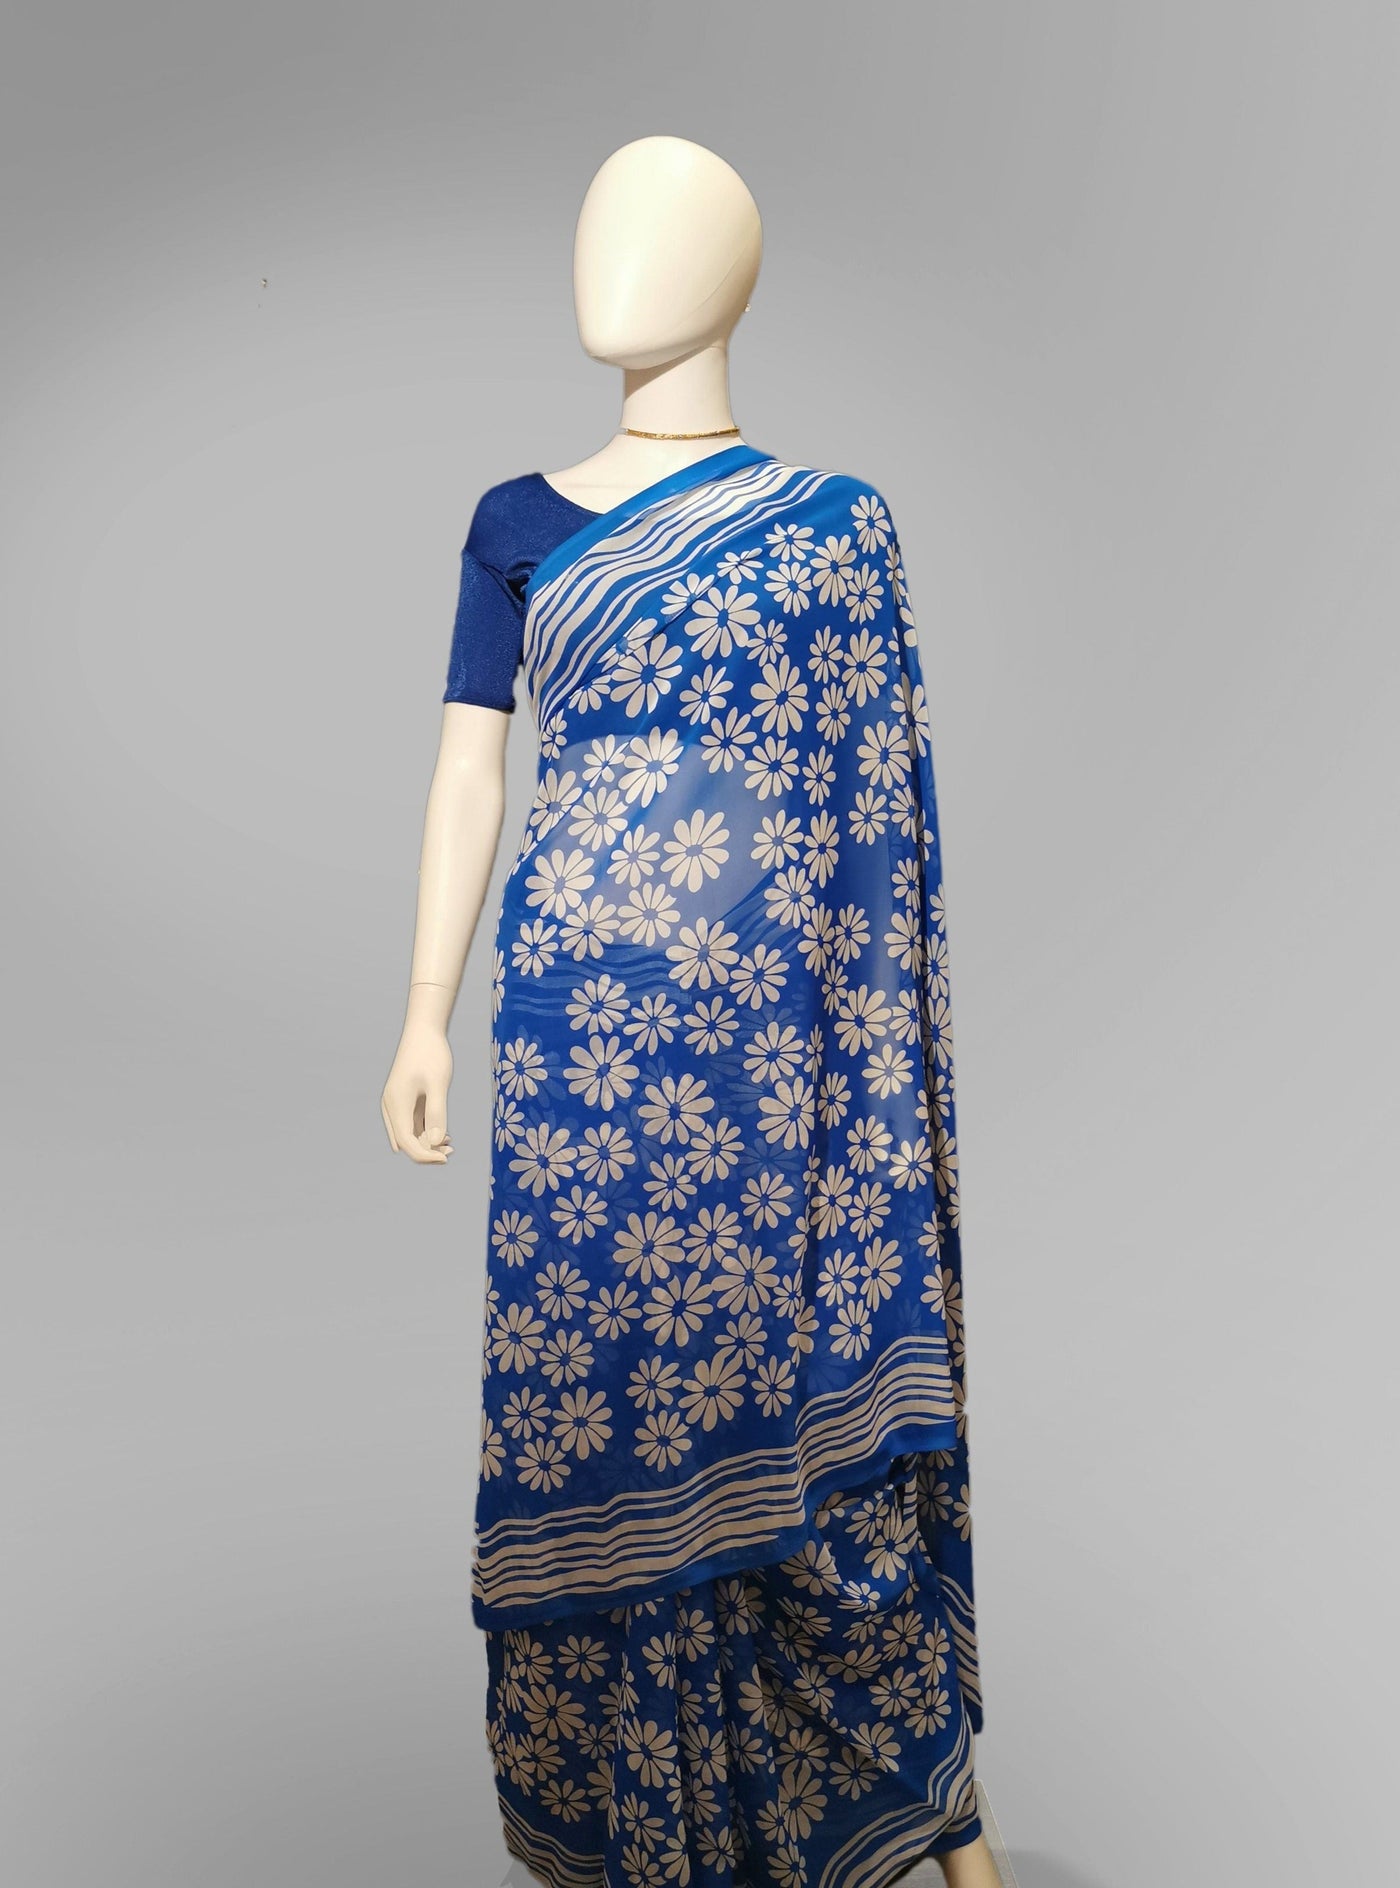 Saree in Blue with White Floral Print Indian Clothing in Denver, CO, Aurora, CO, Boulder, CO, Fort Collins, CO, Colorado Springs, CO, Parker, CO, Highlands Ranch, CO, Cherry Creek, CO, Centennial, CO, and Longmont, CO. NATIONWIDE SHIPPING USA- India Fashion X